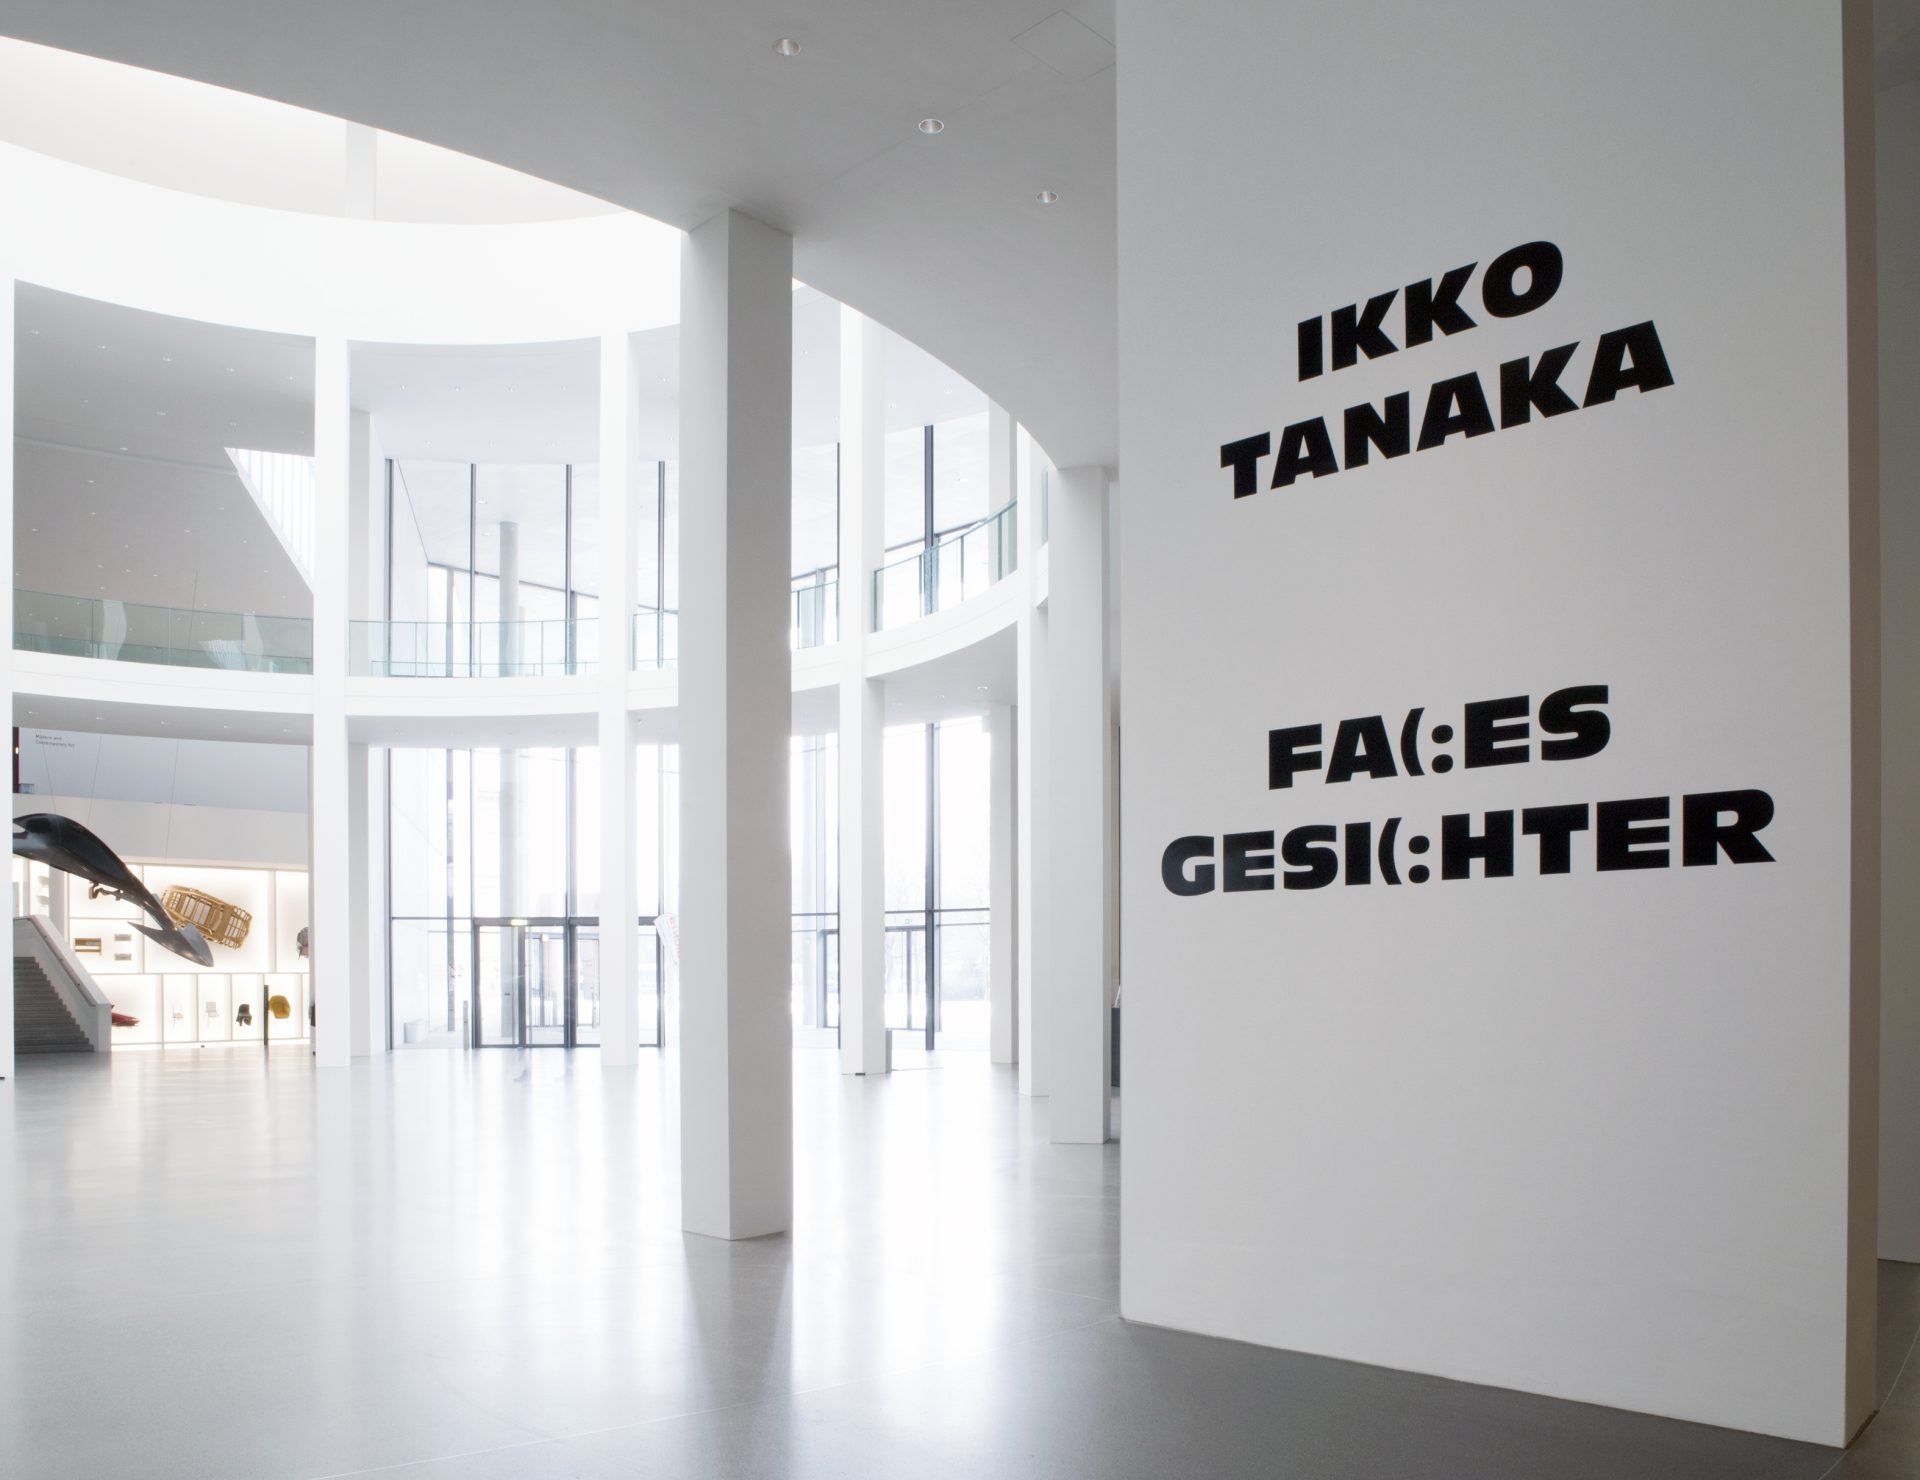 Wall with the announcement of the exhibition, Ikko Tanaka, Faces, Gesichter